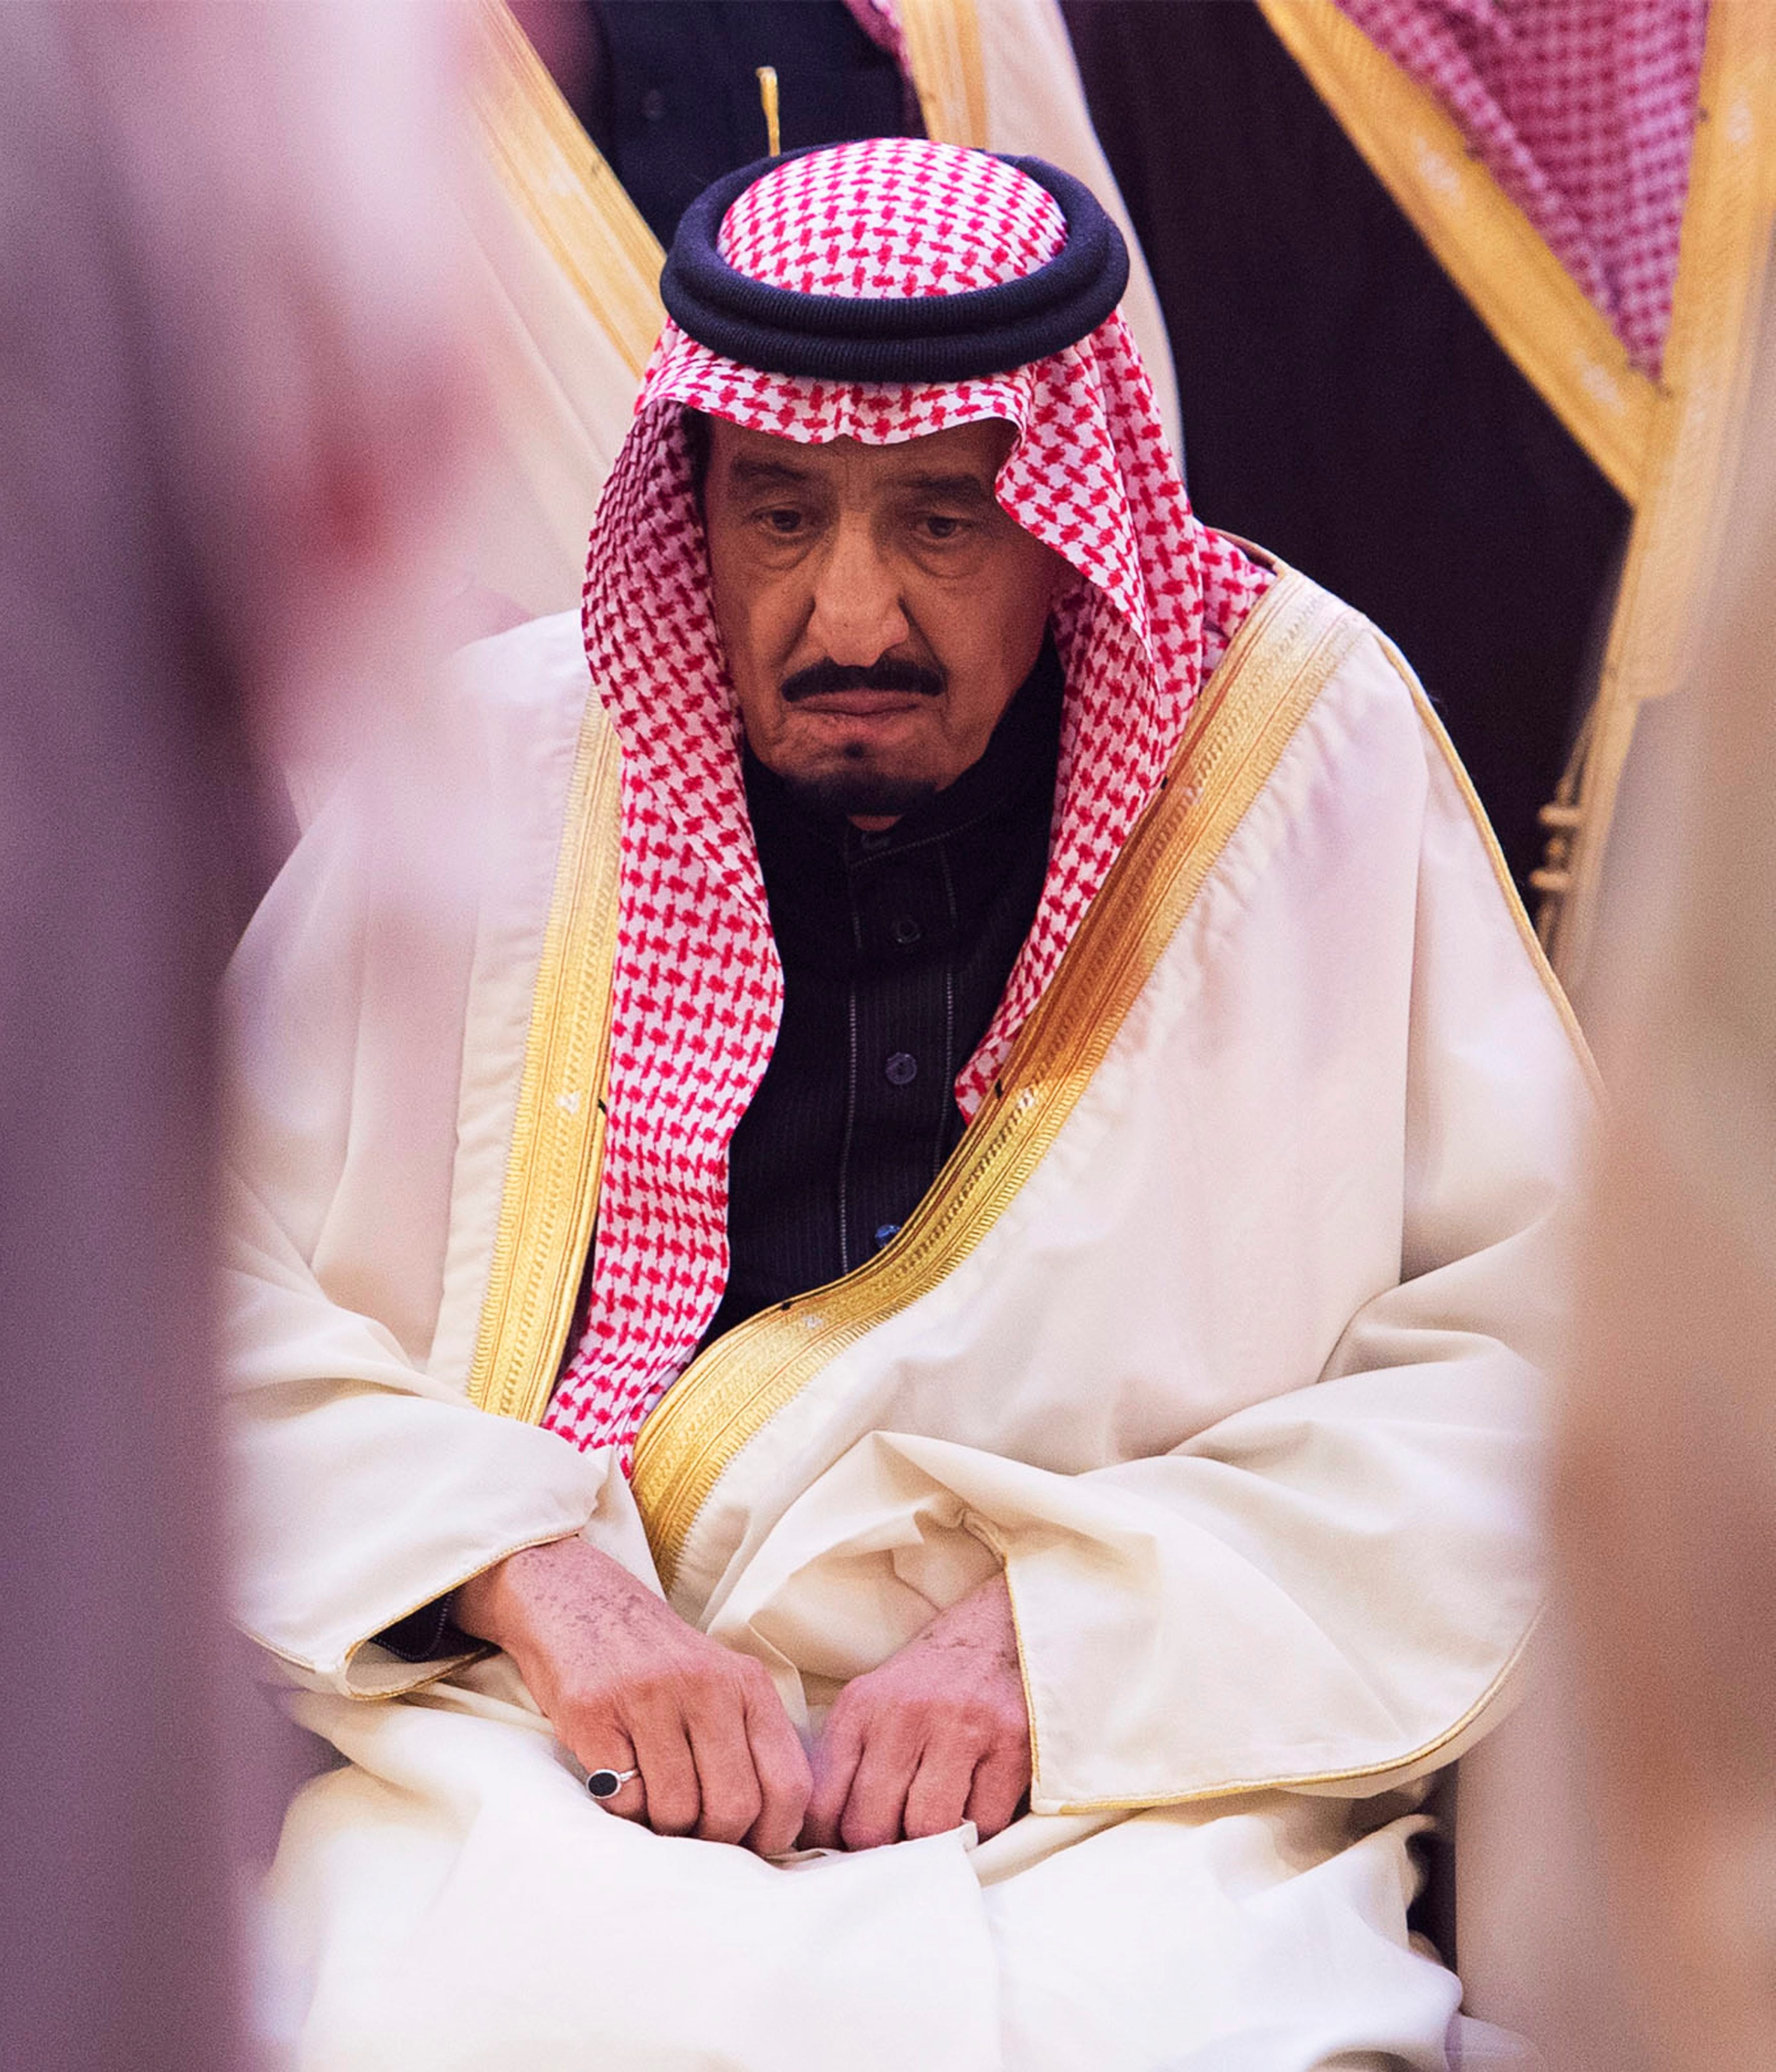 Saudis new King Salman likely to stay the course